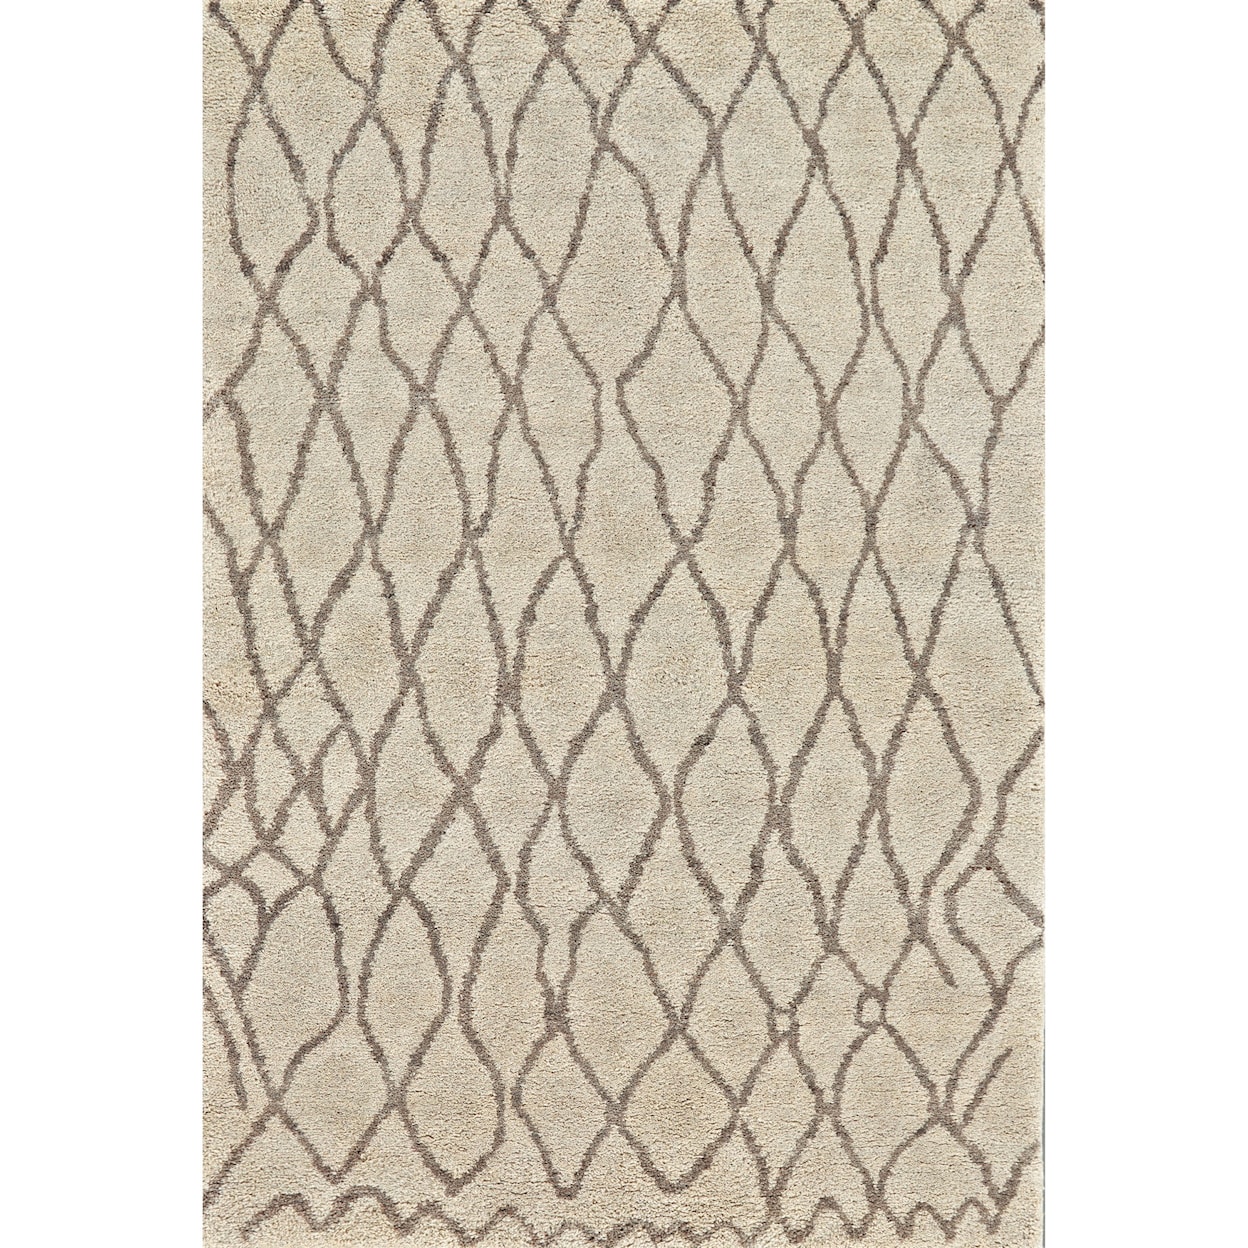 Feizy Rugs Barbary Natural/Bone 2' x 3' Area Rug